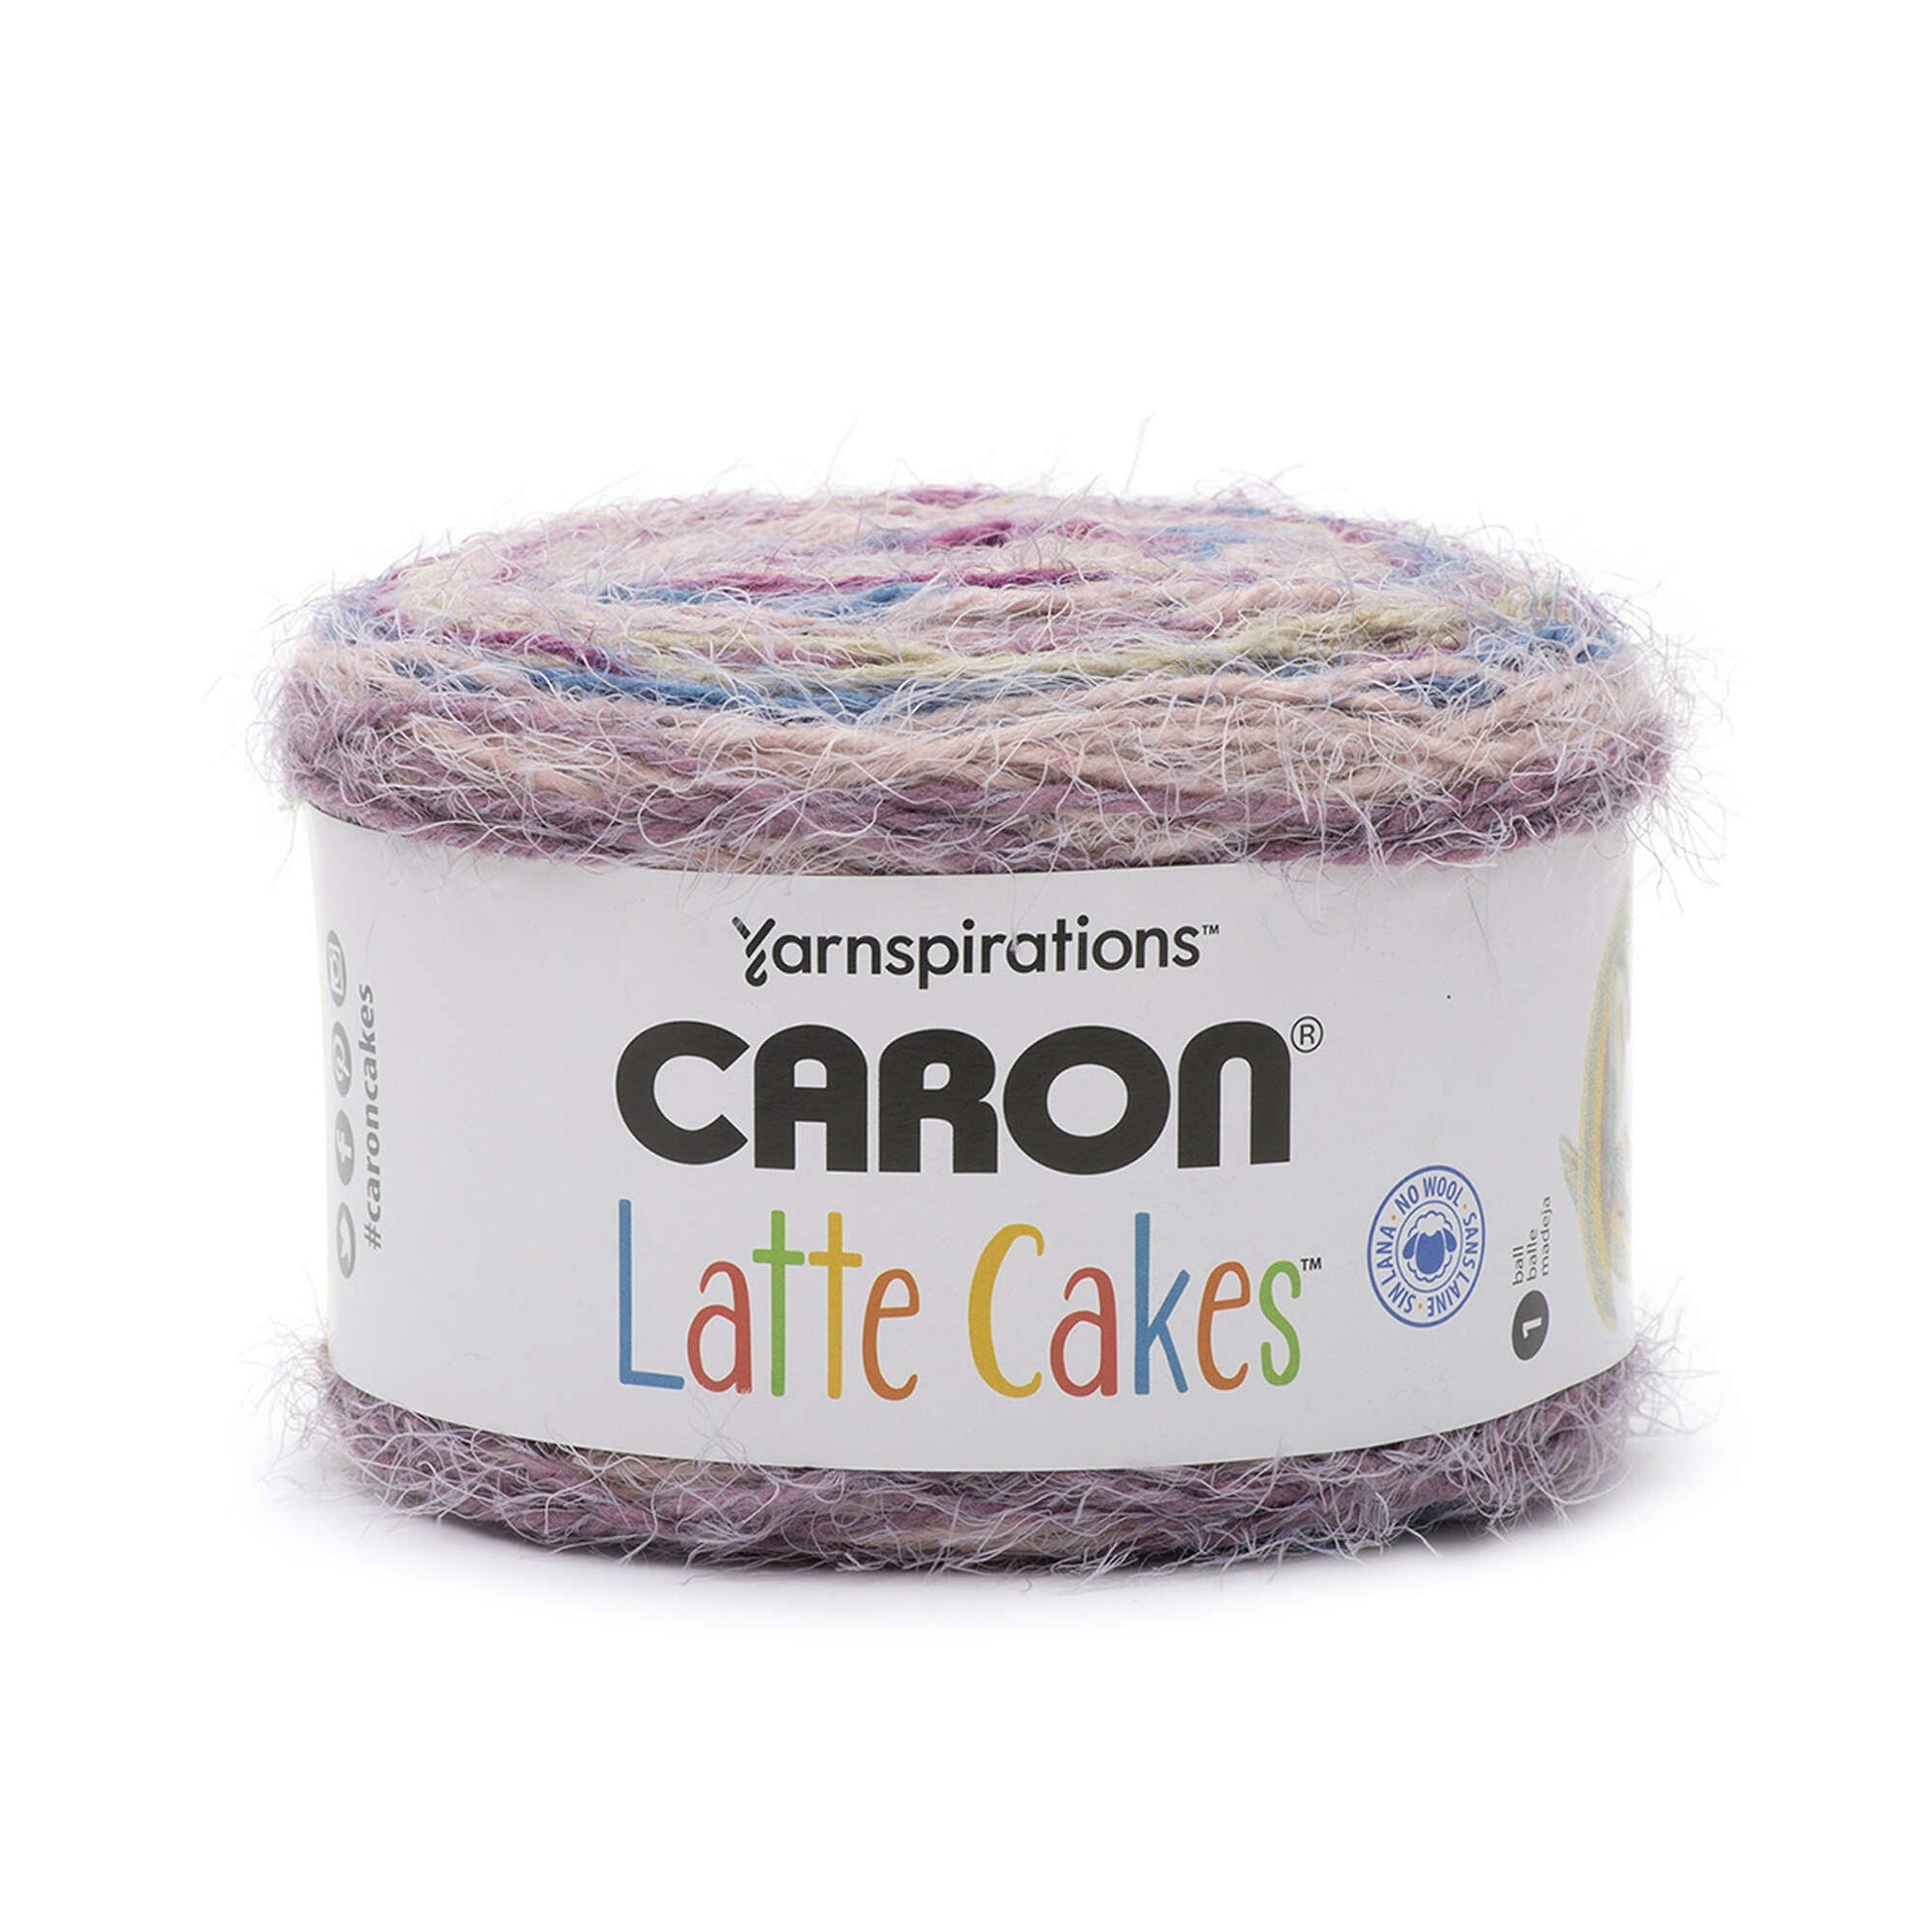  CARON Cinnamon Swirl Cakes Colour is Lilac and Lime